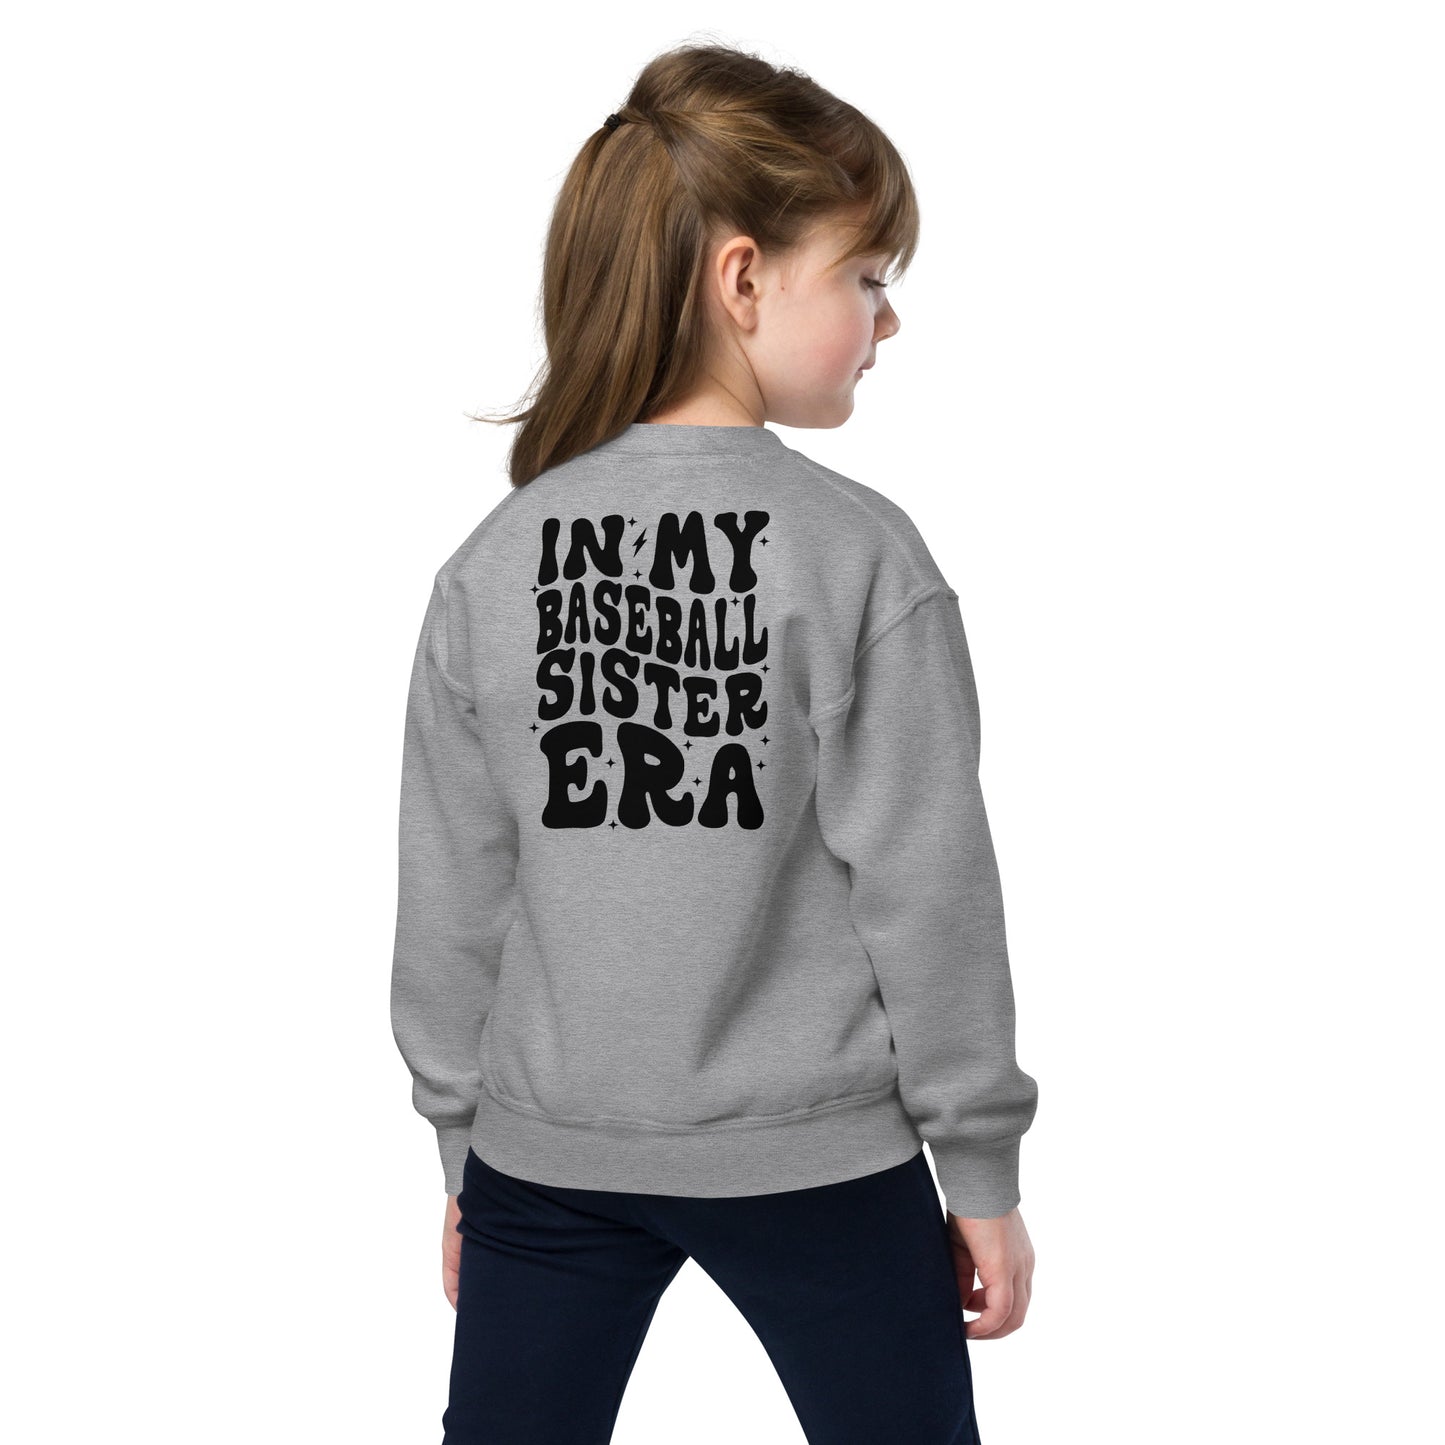 Chic Youth Baseball Sister Era Crew Neck Sweatshirt - Perfect for Game Days and Casual Wear